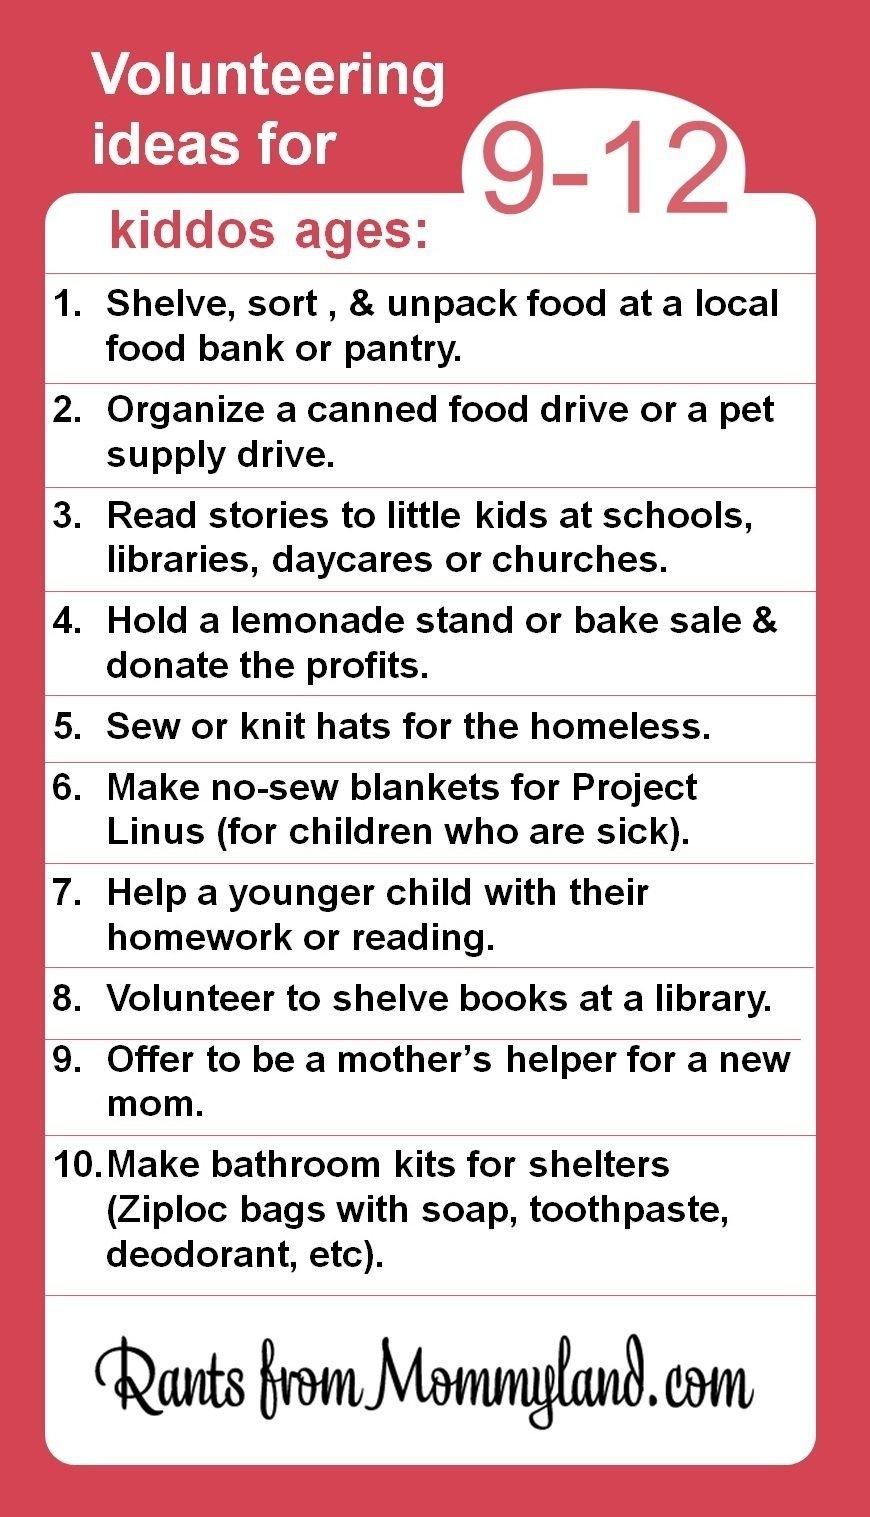 10 Fabulous Ideas For Community Service Projects volunteer and service ideas for kiddos ages 9 12 kids can do a lot 2 2022